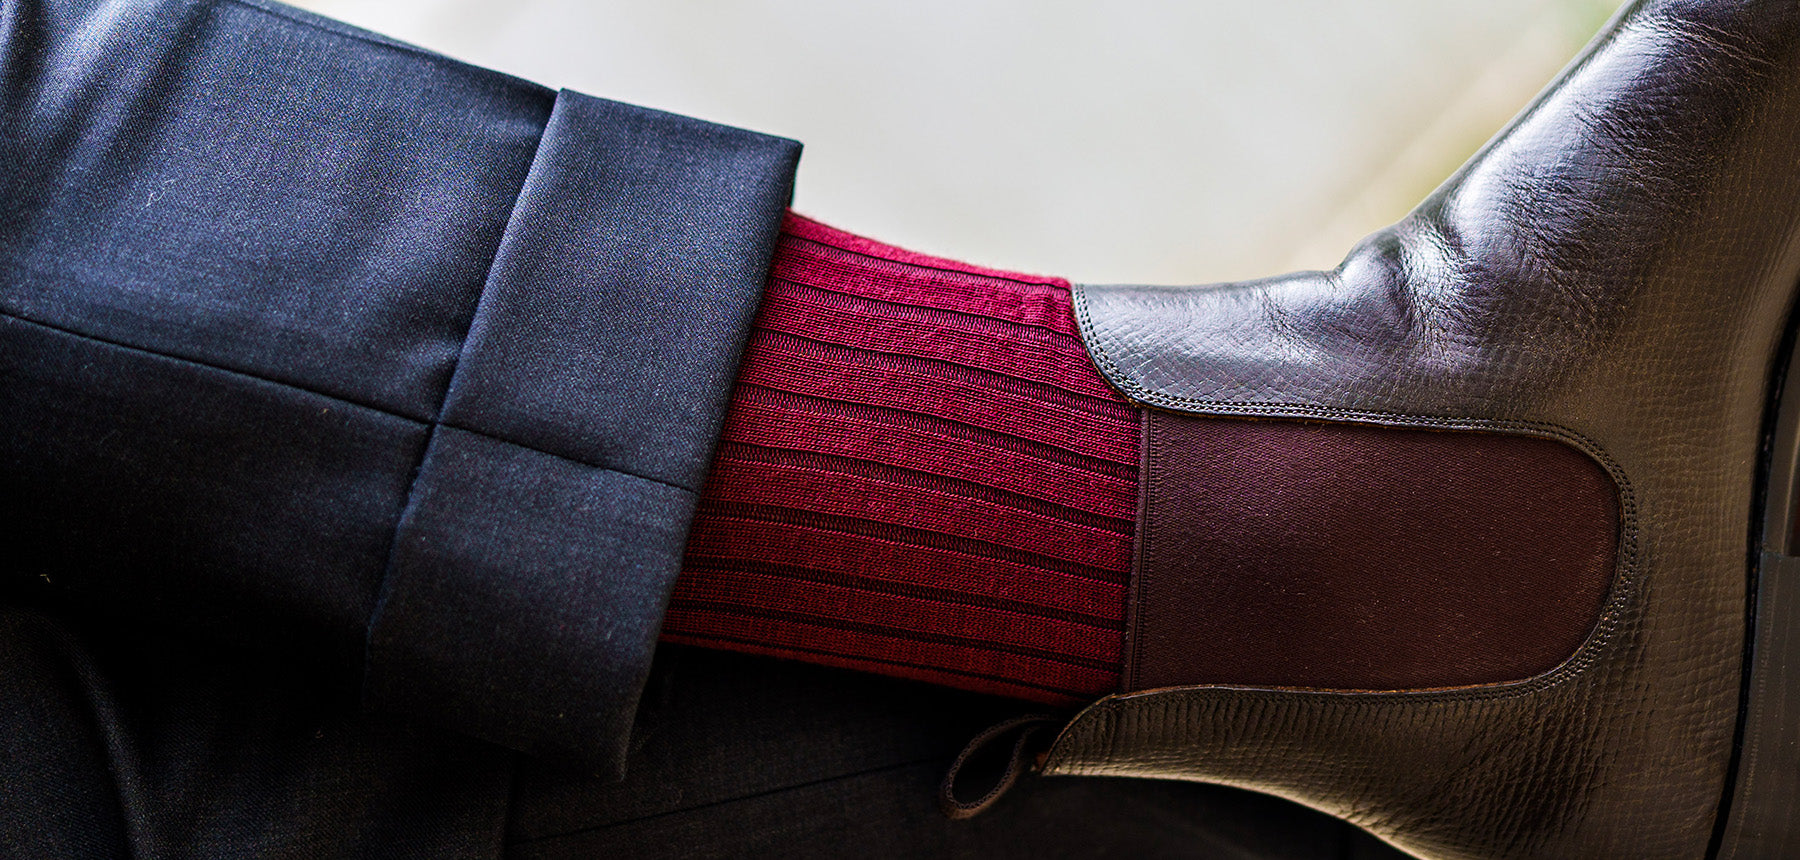 man wearing burgundy dress socks with chelsea boots and a grey suit